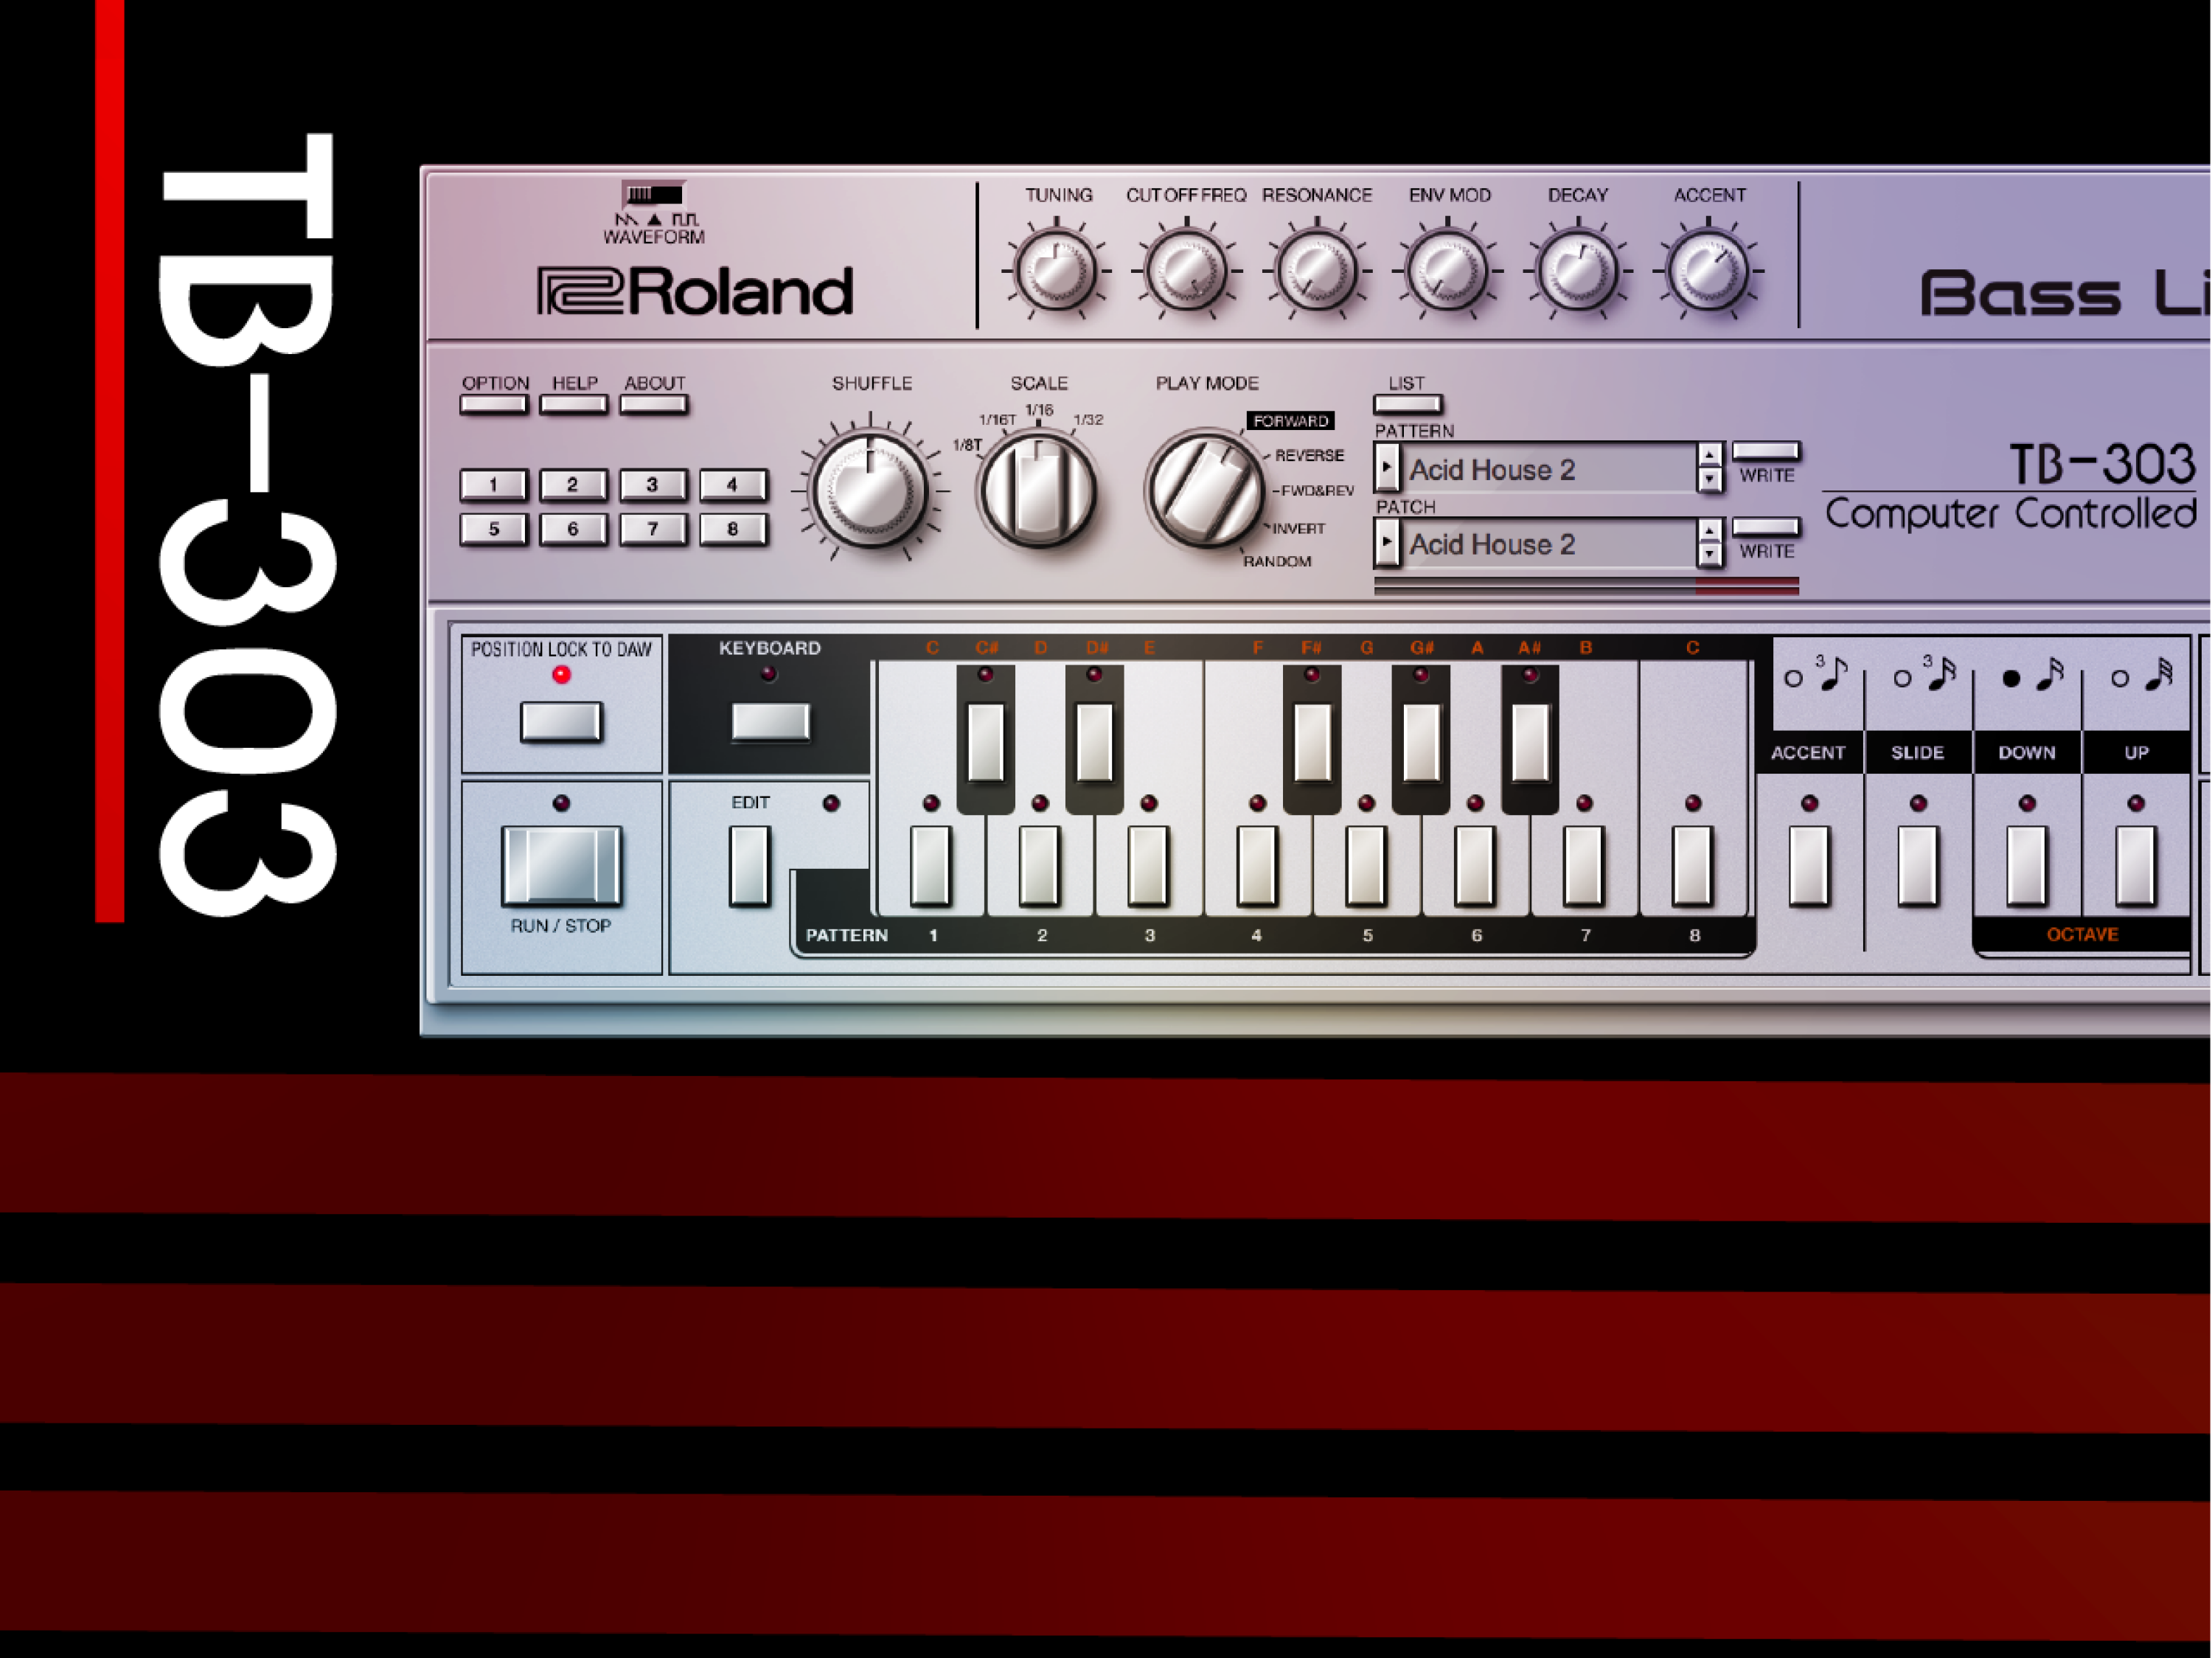 Midilab Offers FREE JC-303 Bass Synth VST Plugin - Bedroom Producers Blog